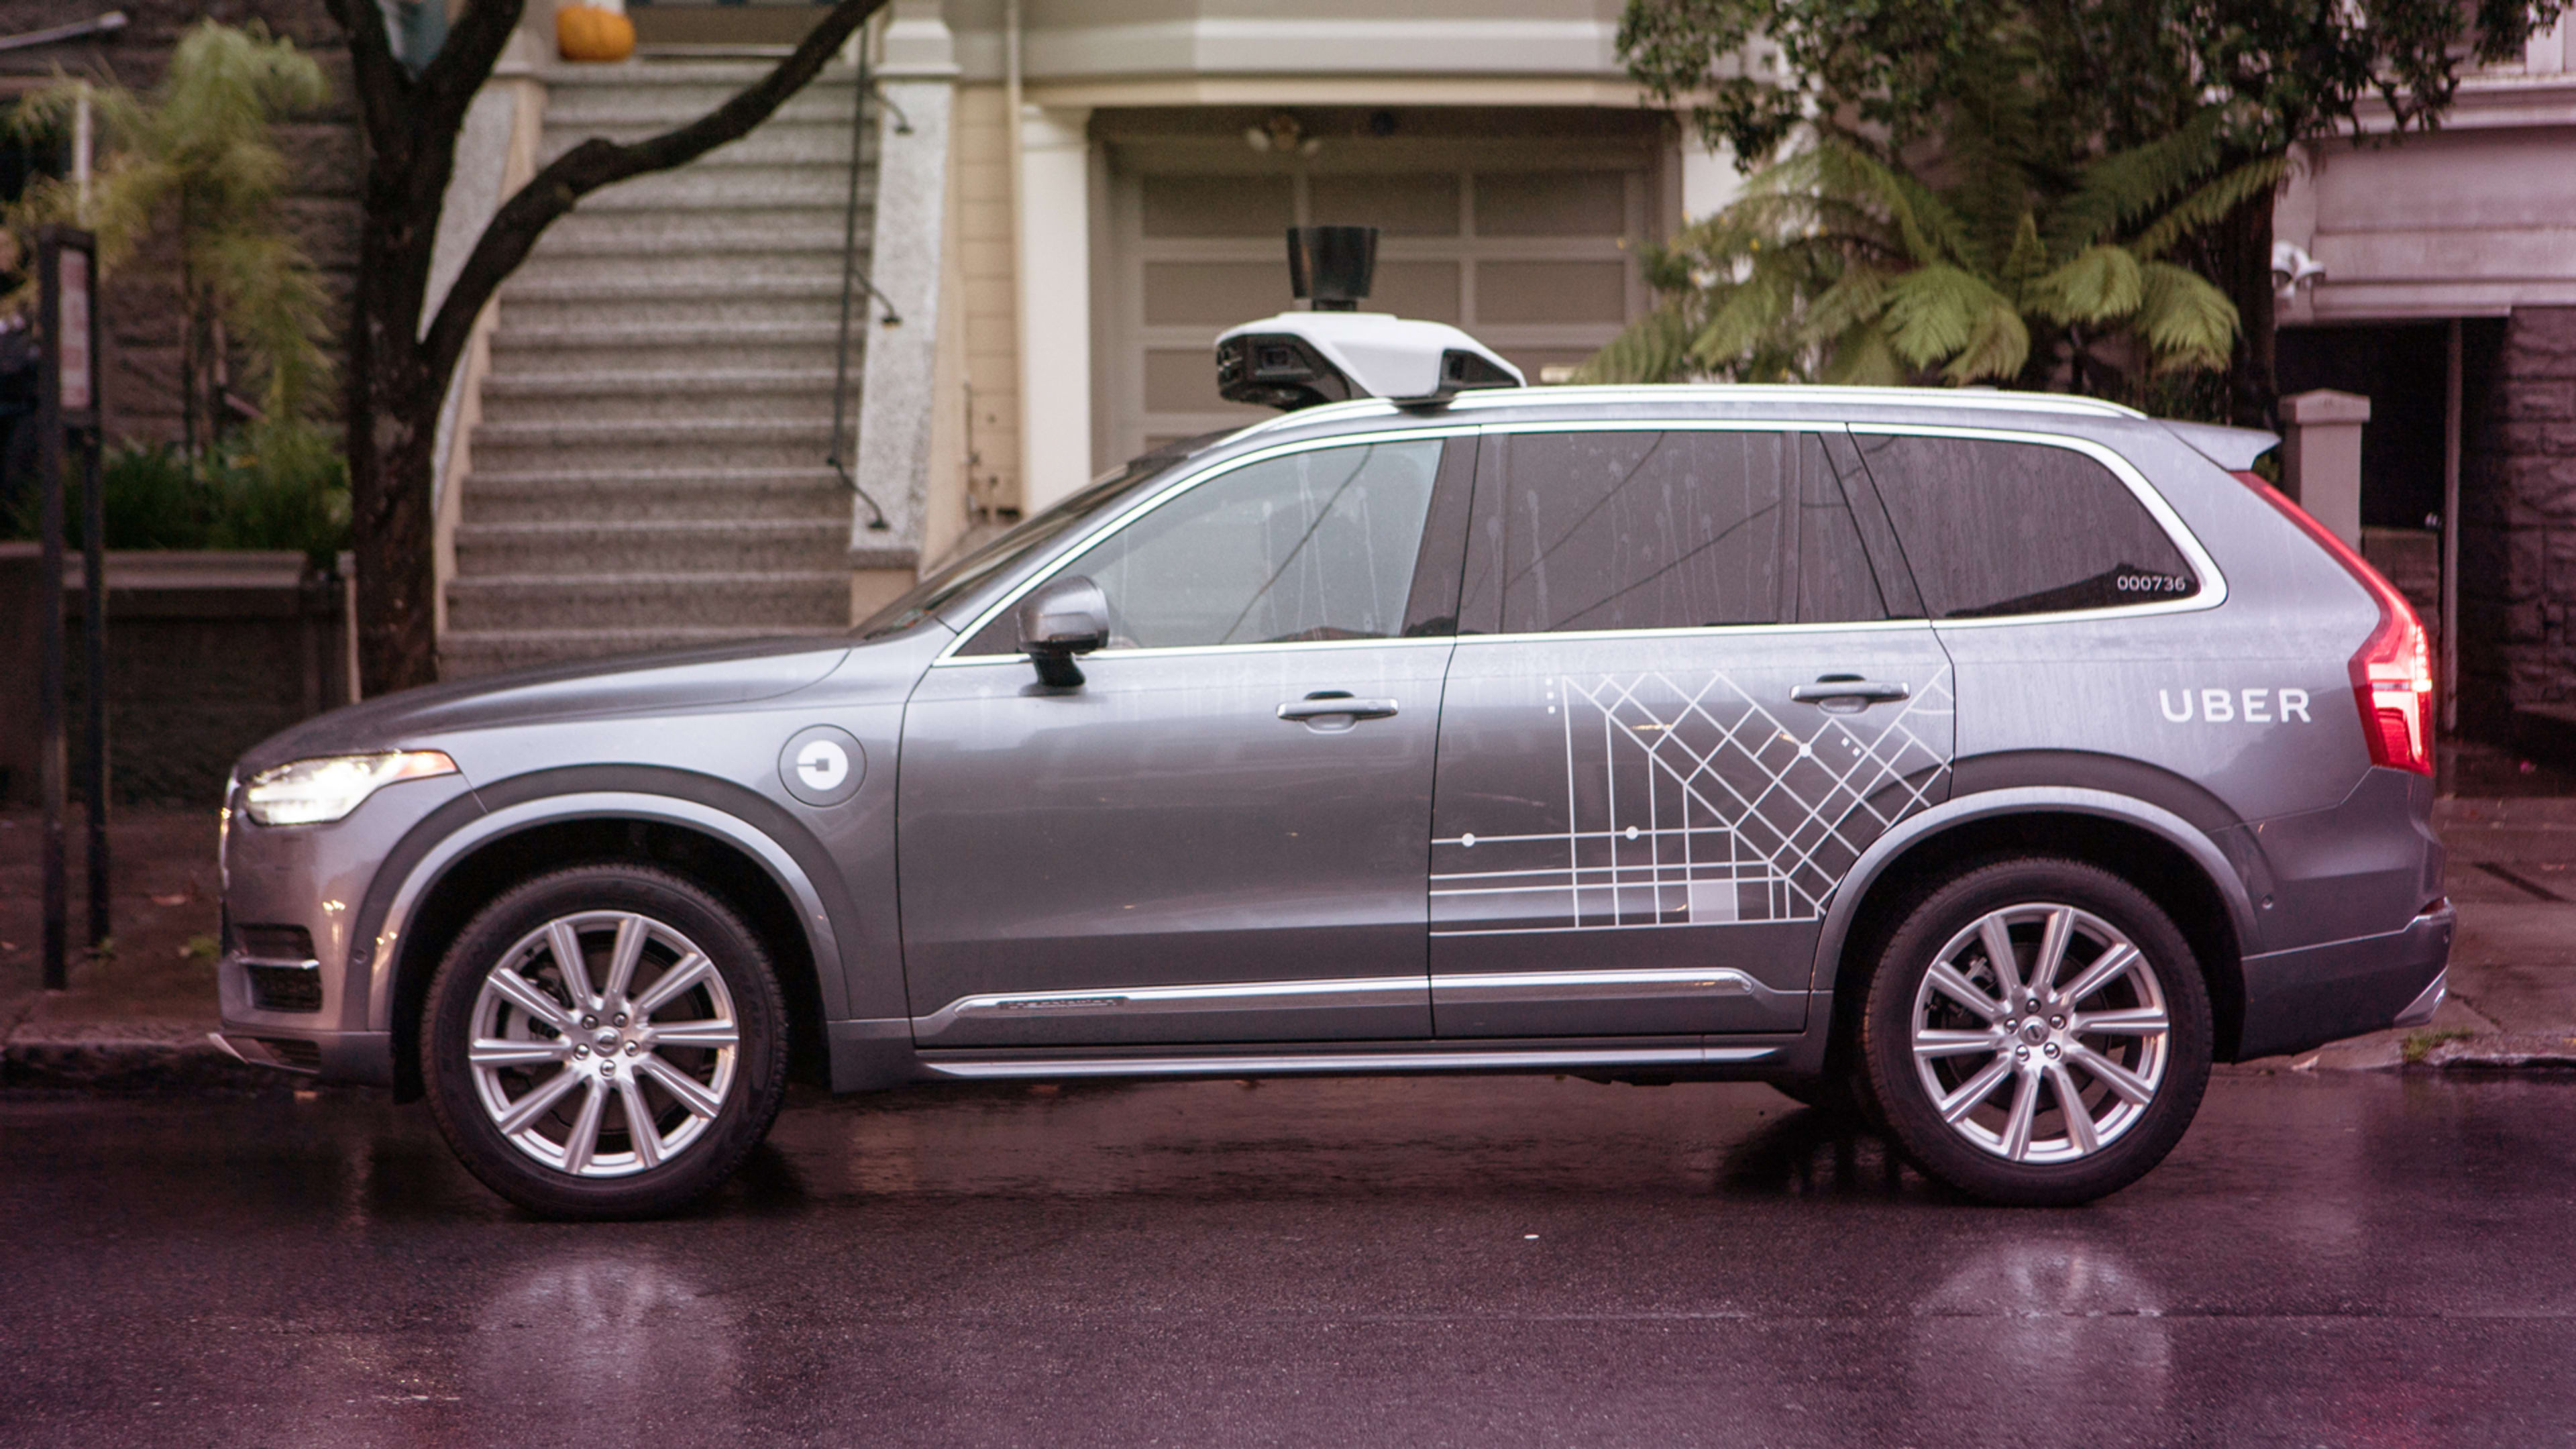 Uber lays off 100 self-driving car test drivers